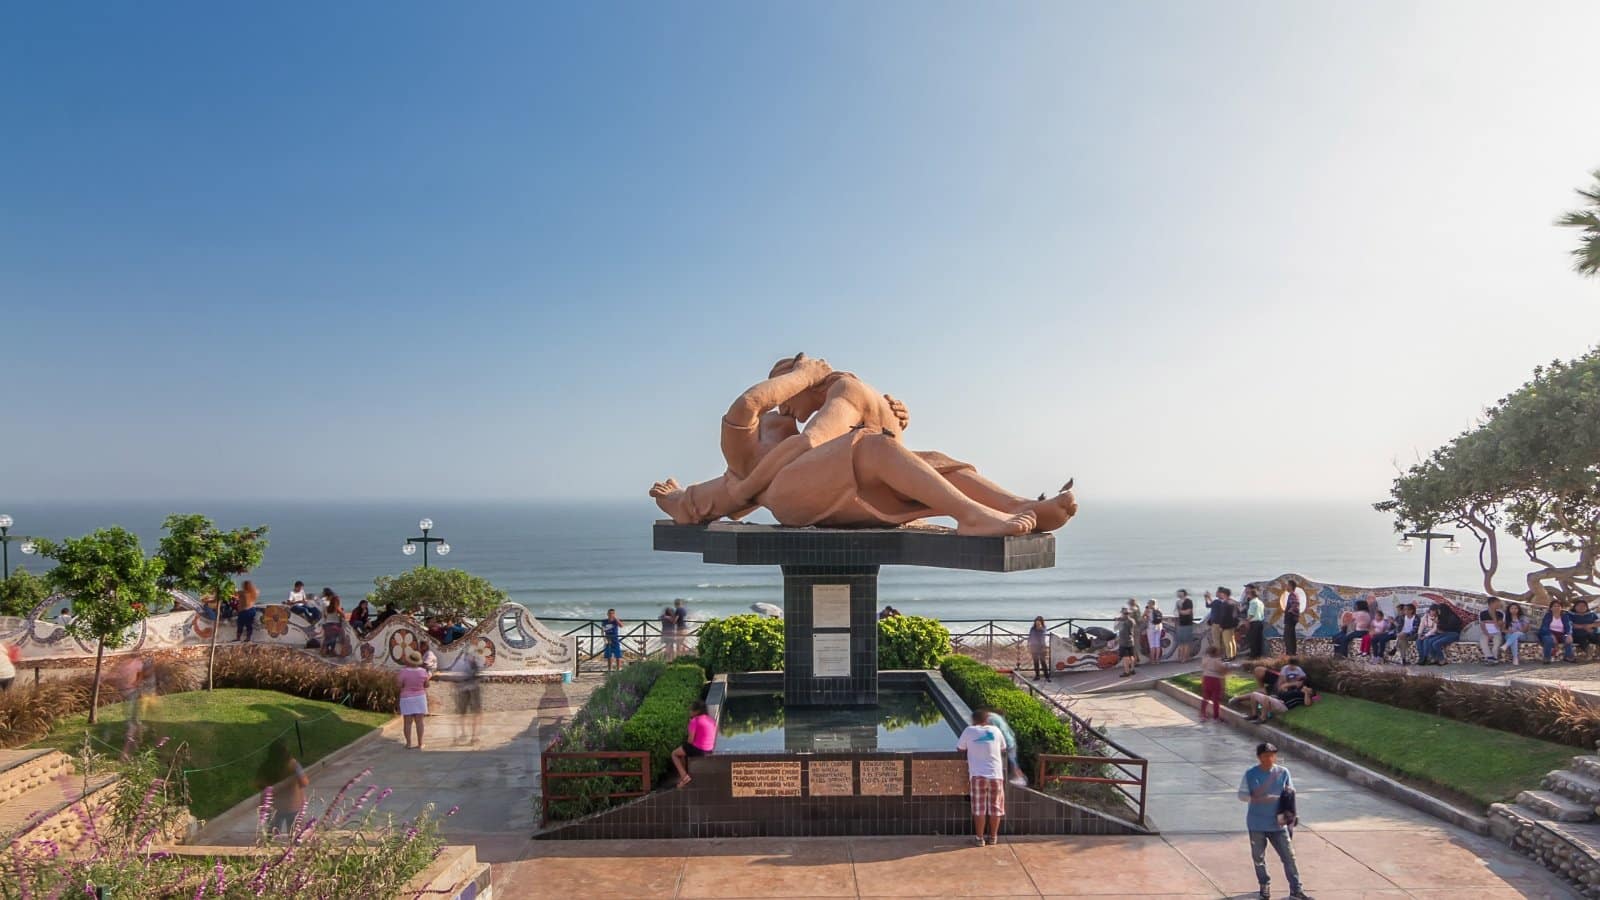 <p class="wp-caption-text">Image Credit: Shutterstock / Kirill Neiezhmakov</p>  <p><span>Parque del Amor, or Love Park, located along the Malecón in Miraflores, is a romantic spot known for its stunning views of the Pacific Ocean and the iconic El Beso sculpture, depicting two lovers embracing. The park’s Gaudí-inspired mosaic benches are inscribed with quotes about love, making it a favorite place for couples to visit.</span></p> <p><span>The park is especially popular at sunset when the sky and sea are painted in vibrant colors, creating a picturesque setting for a romantic stroll or a moment of reflection.</span></p>